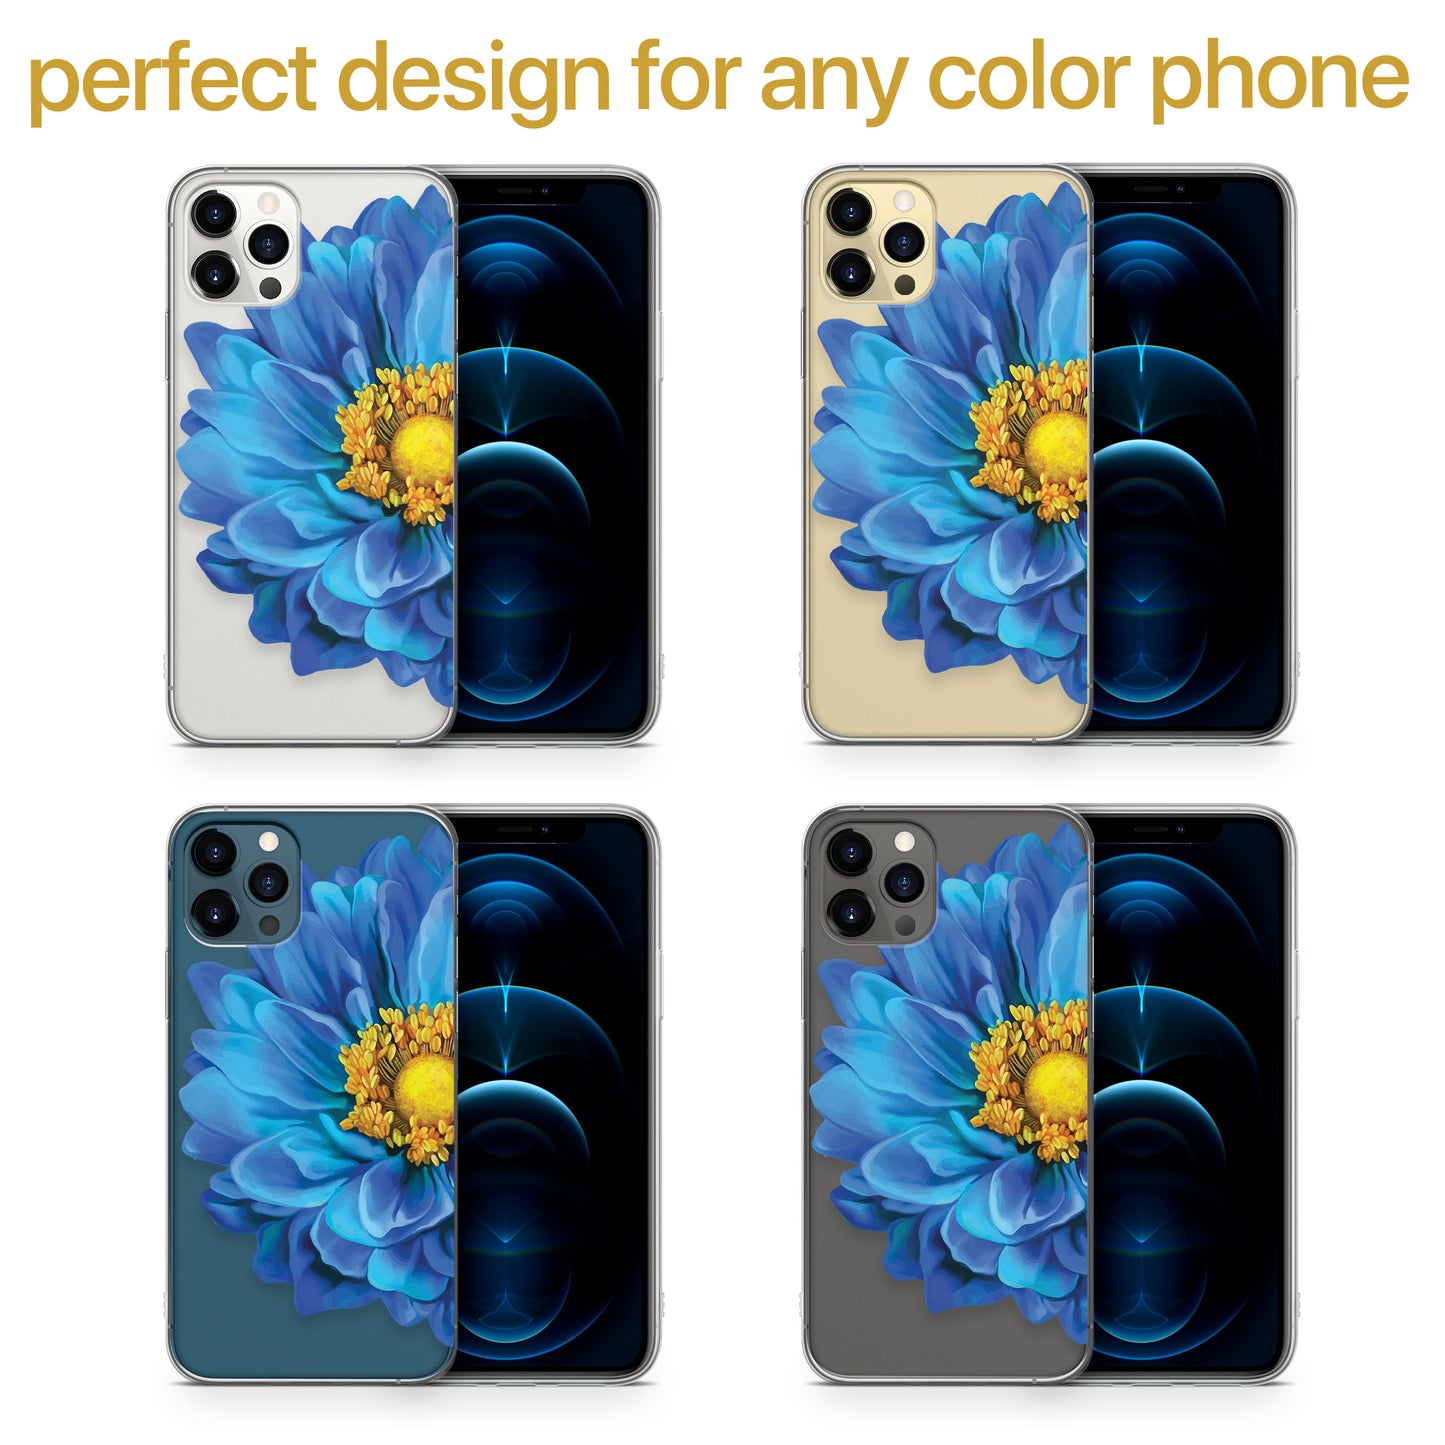 TPU Clear case with (Blue Flower) Design for iPhone & Samsung Phones